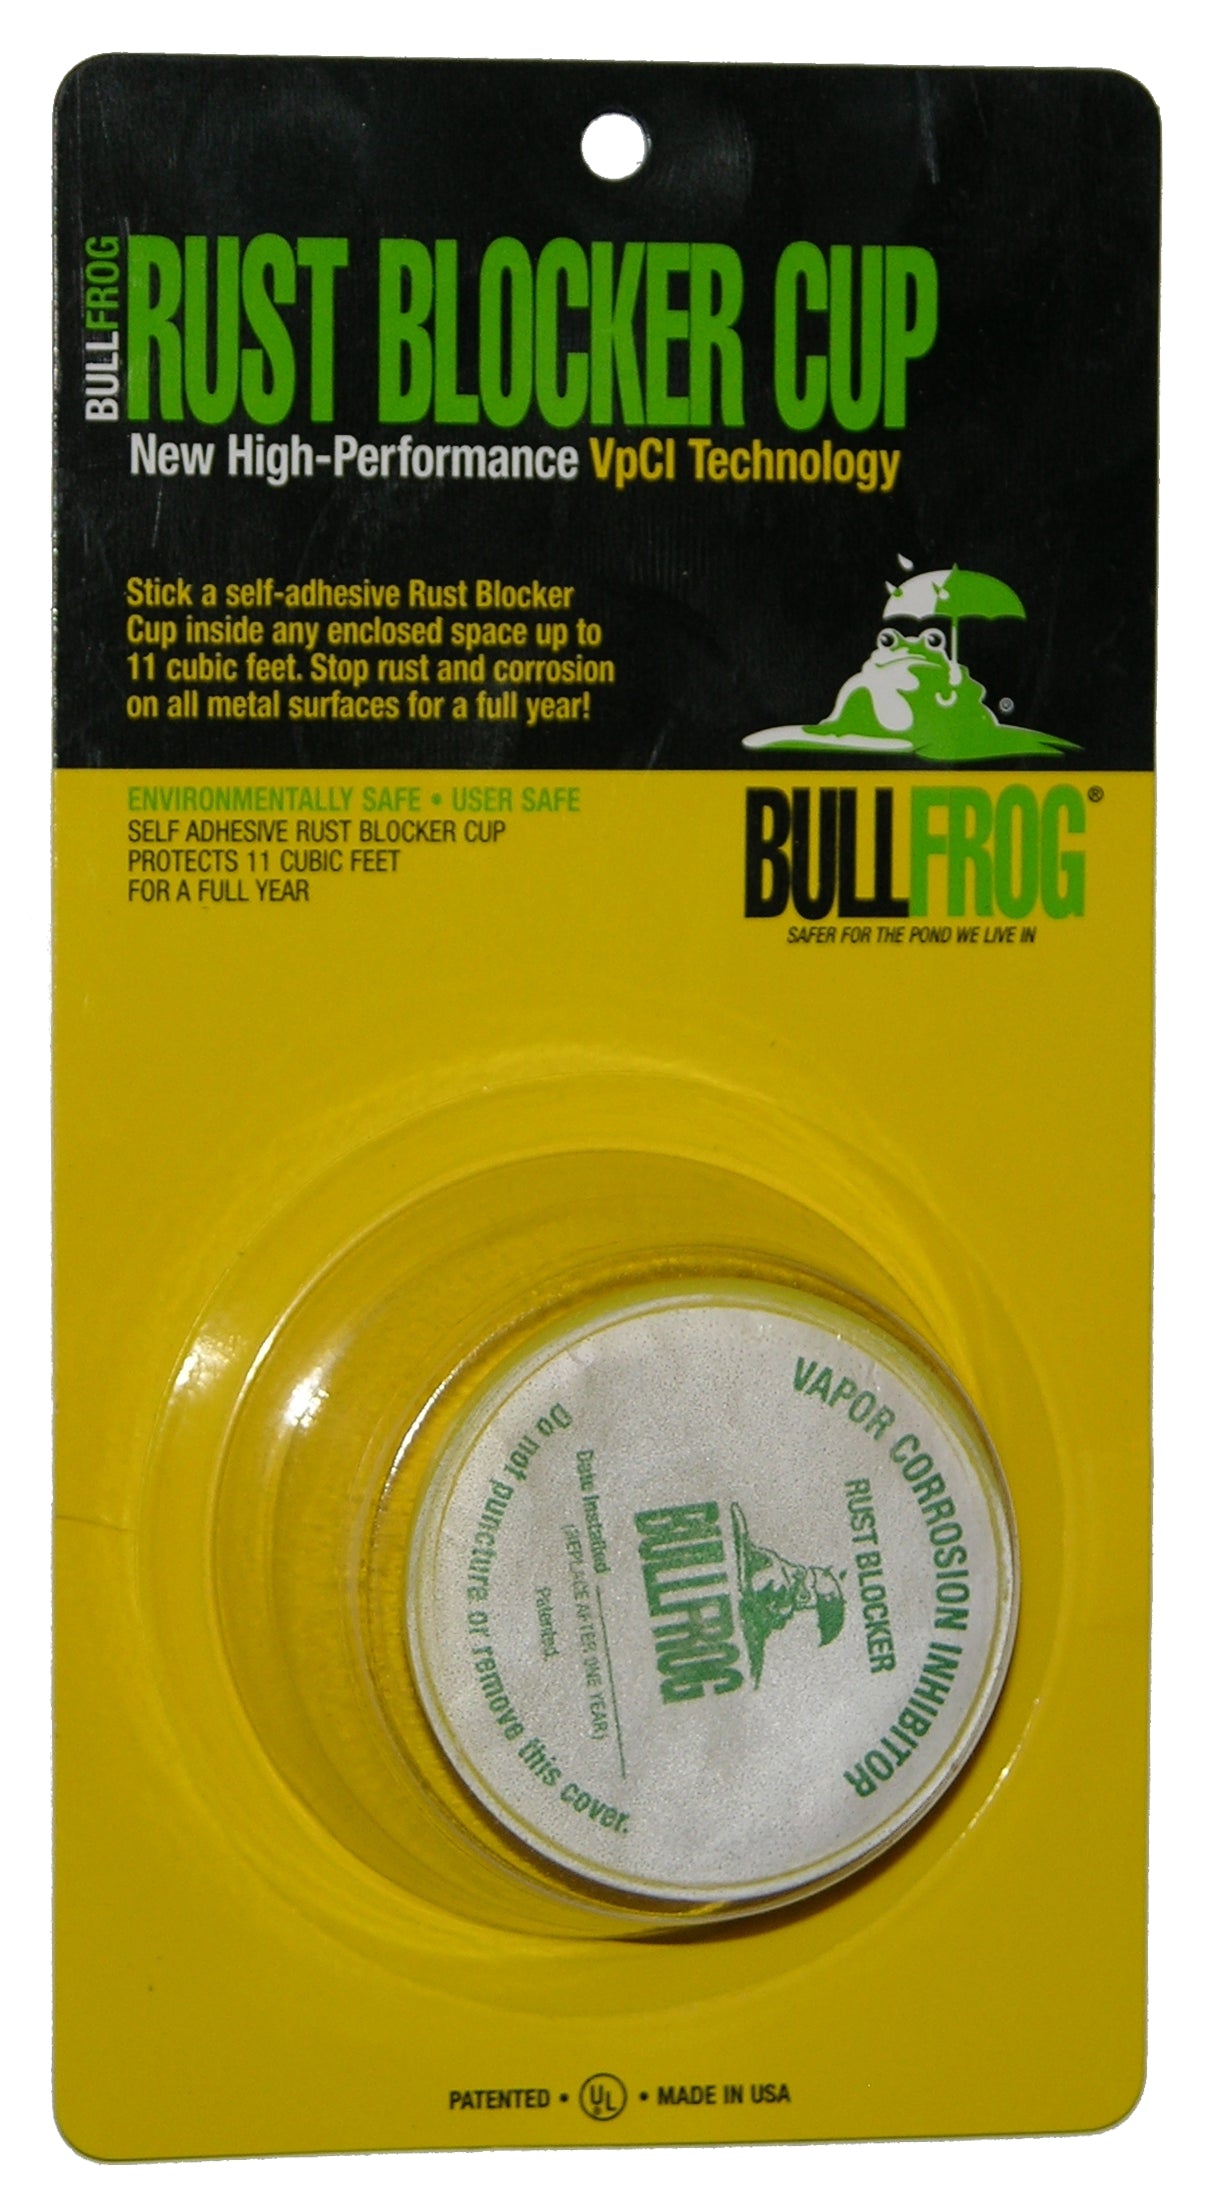 Bull Frog, Bull Frog 91112 Rust Blocker Emitter Self Adhesive Cup Protects up to 11 Cu Ft